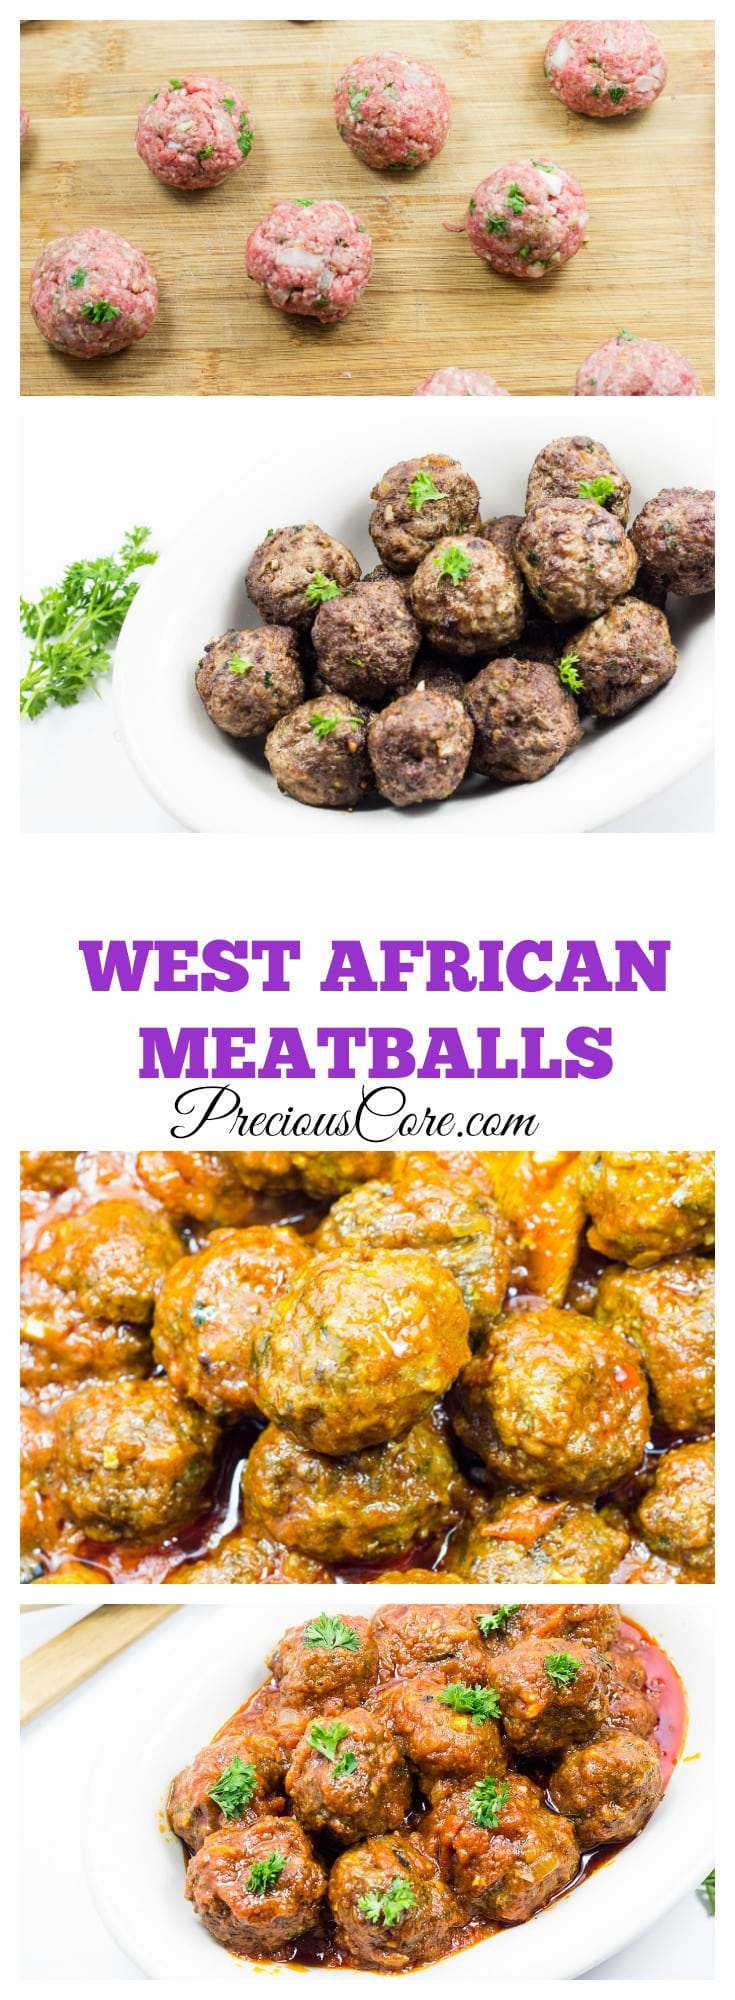 Meatballs in tomato sauce - West African style